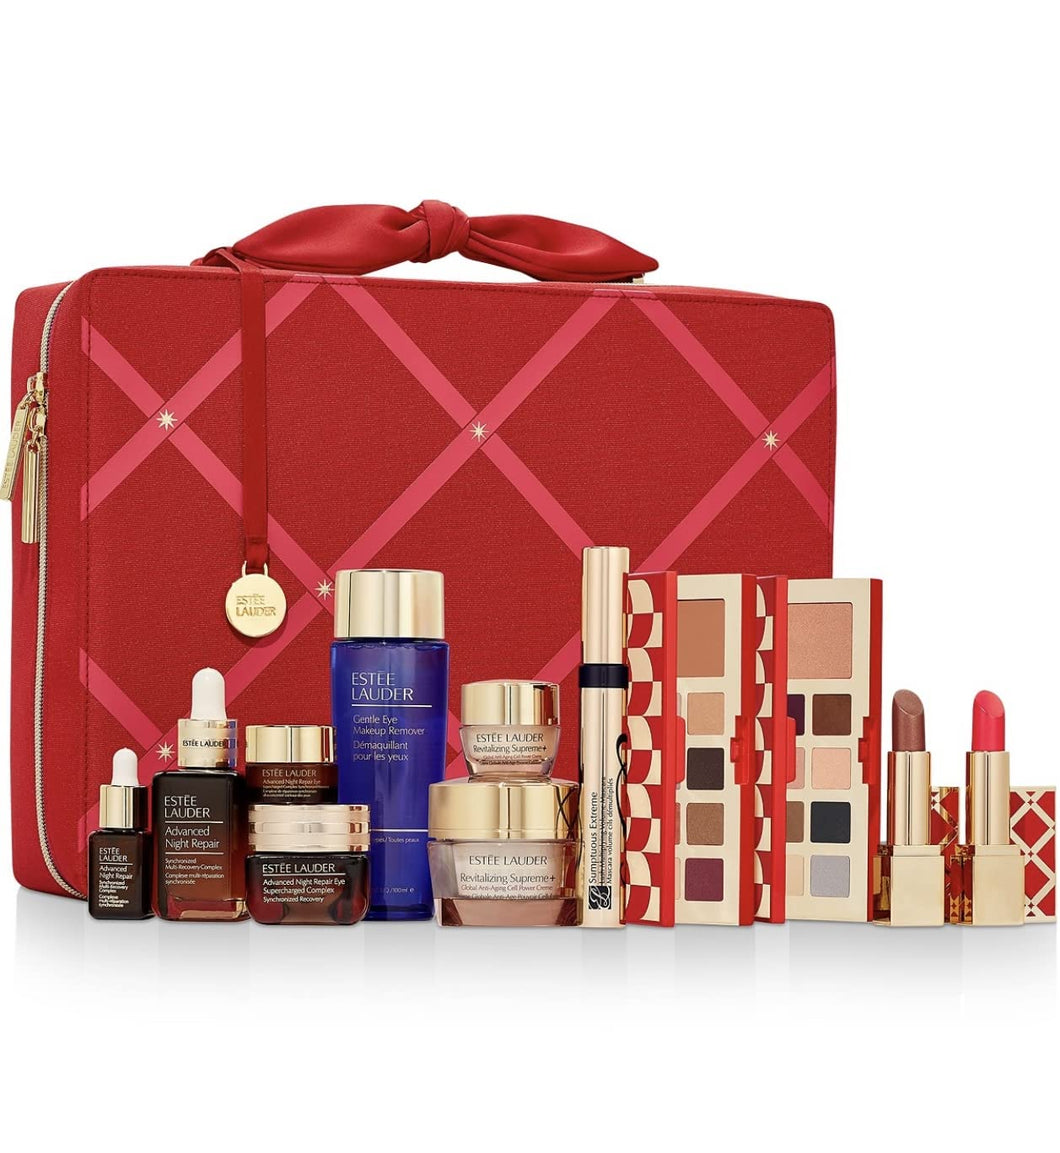 Estee Lauder Holiday Makeup Kit Gift Set 13 pc - 9 FULL SIZE Items Included.